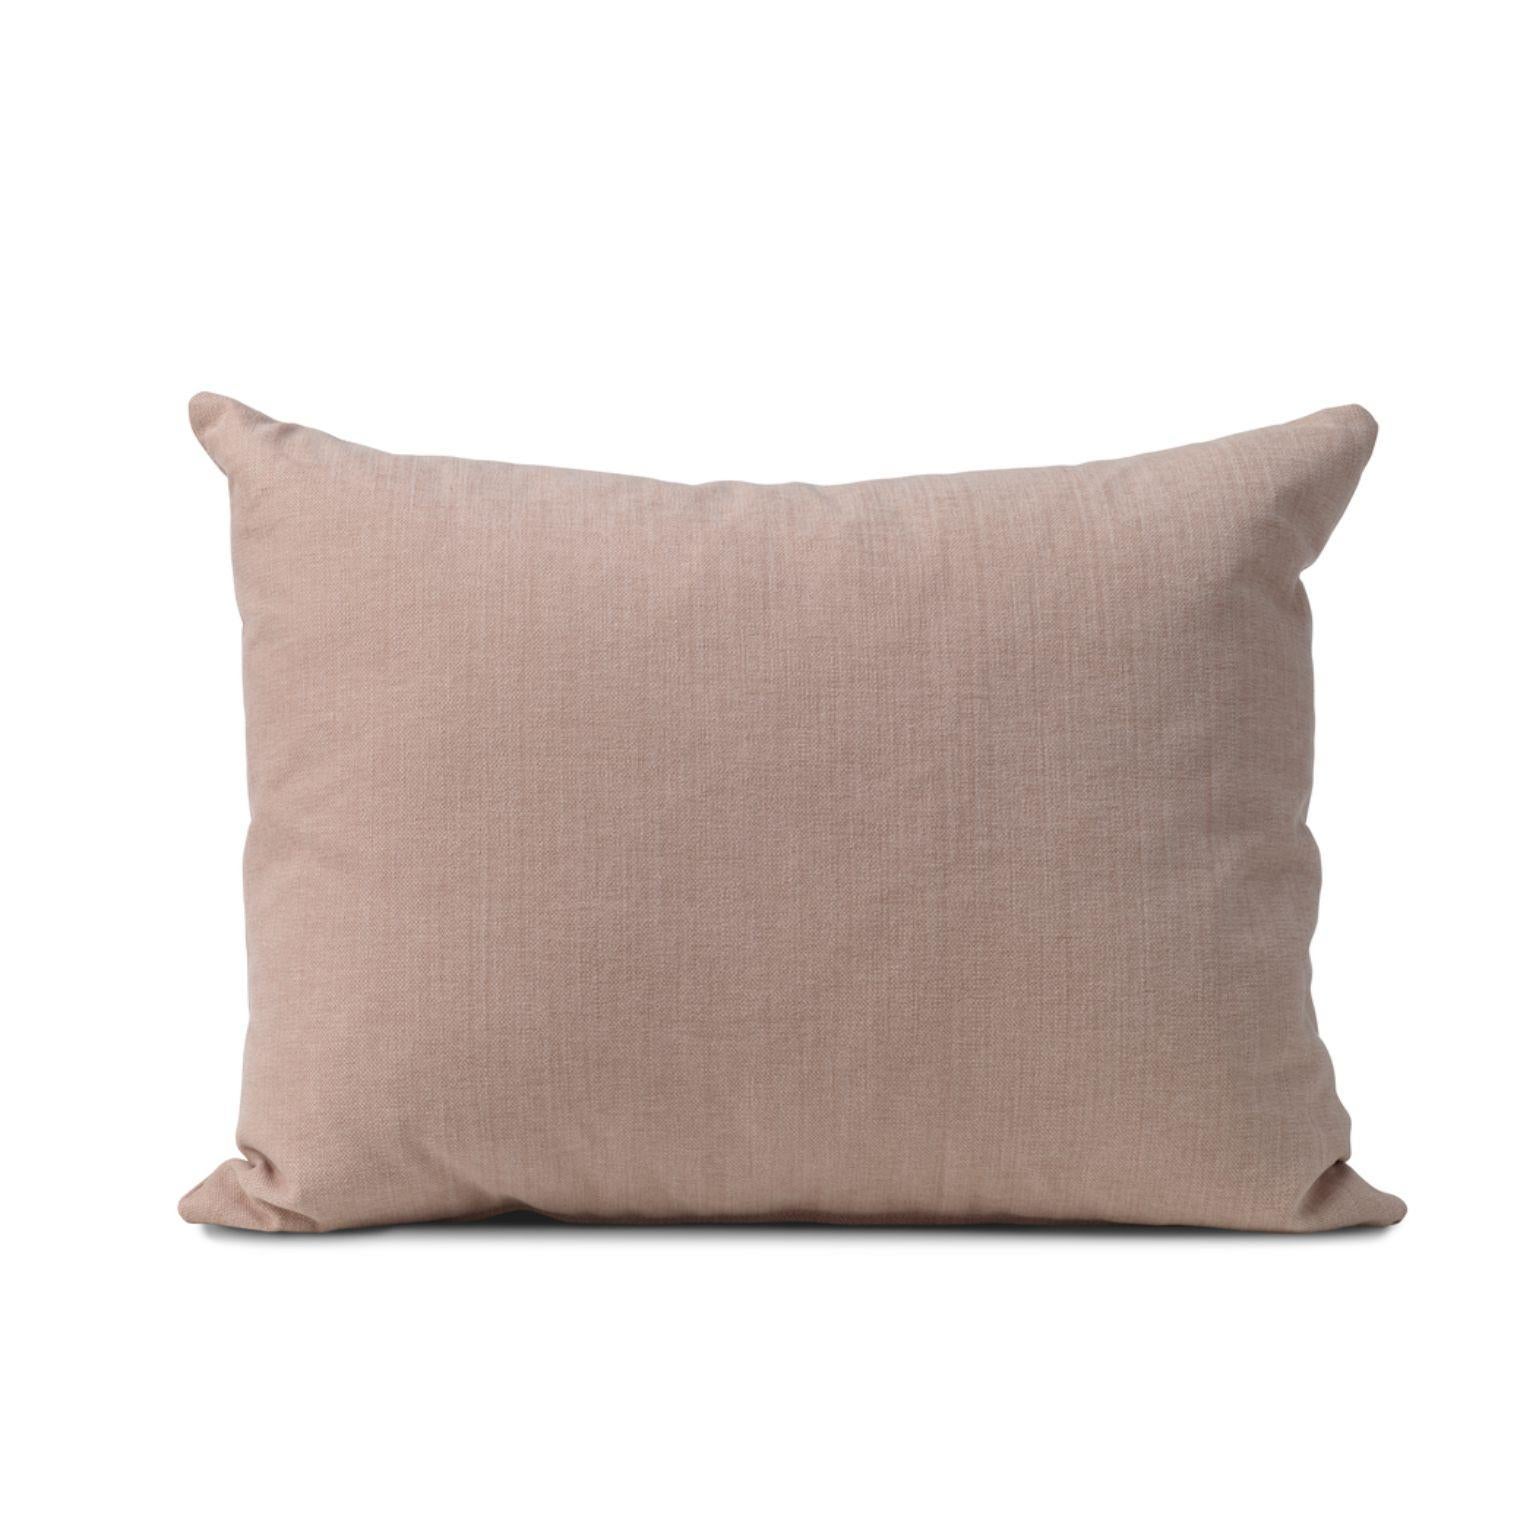 Galore cushion square light rose by Warm Nordic
Dimensions: D70 x H 50 cm
Material: Textile upholstery, Granulate and feathers filling.
Weight: 1.4 kg
Also available in different colours and finishes. 

An elegant oversized sofa cushion, which